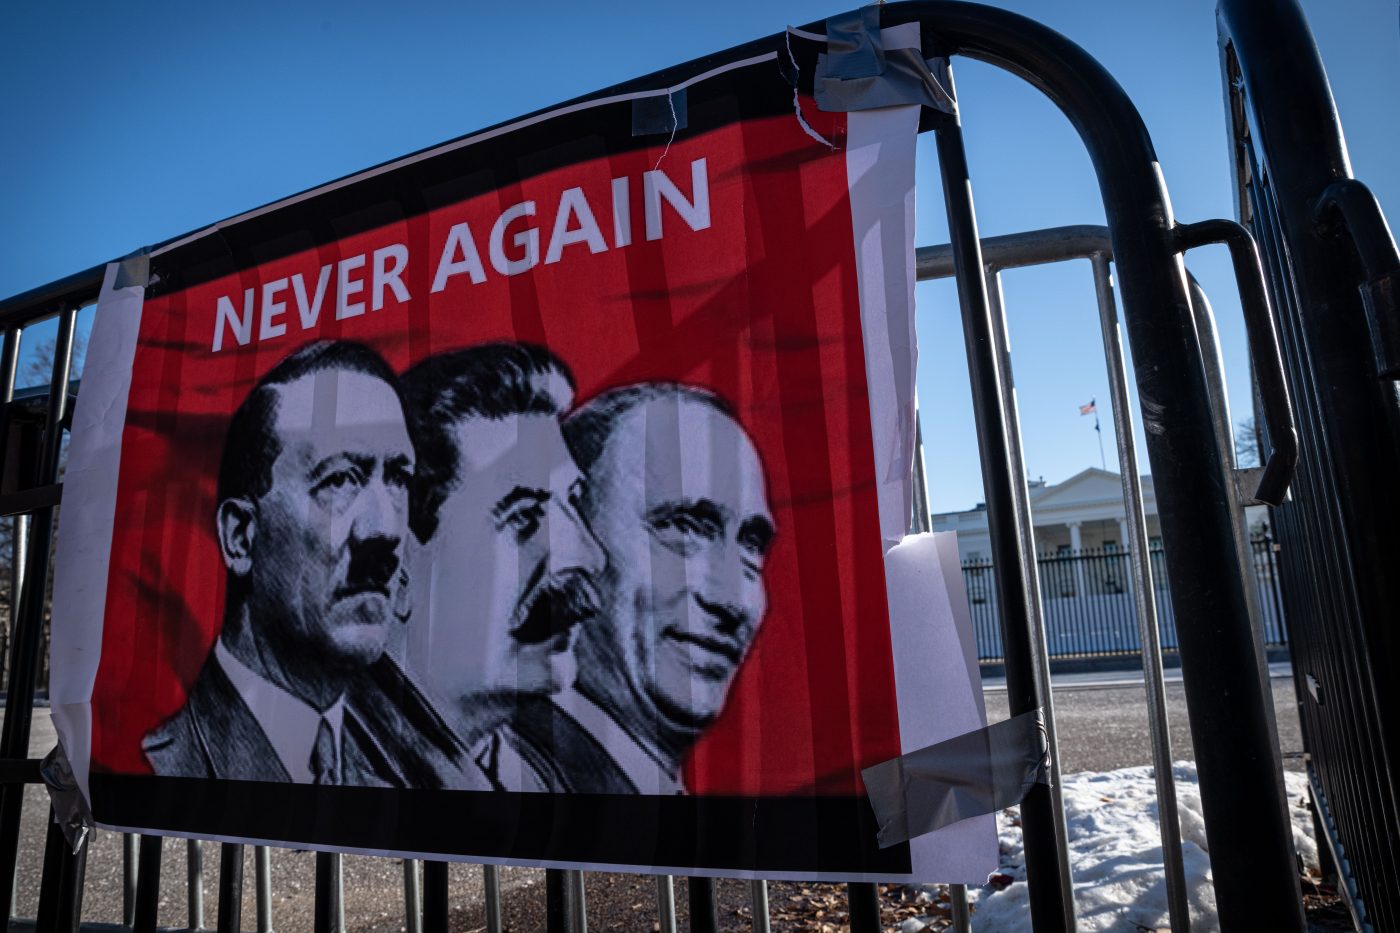 Photo: A sign likens Russian President Vladimir Putin to Joseph Stalin and Adolf Hitler outside the White House in Washington, D.C. on Jan. 29, 2022, during a rally seeking American support for Ukraine. Demonstrators called for the U.S. and its allies to support Ukraine in a potential Russian incursion by providing lethal military aid, axing the Nord Stream 2 pipeline project and severing Russia from the SWIFT payment system. Credit: Photo by Alejandro Alvarez/Sipa USA